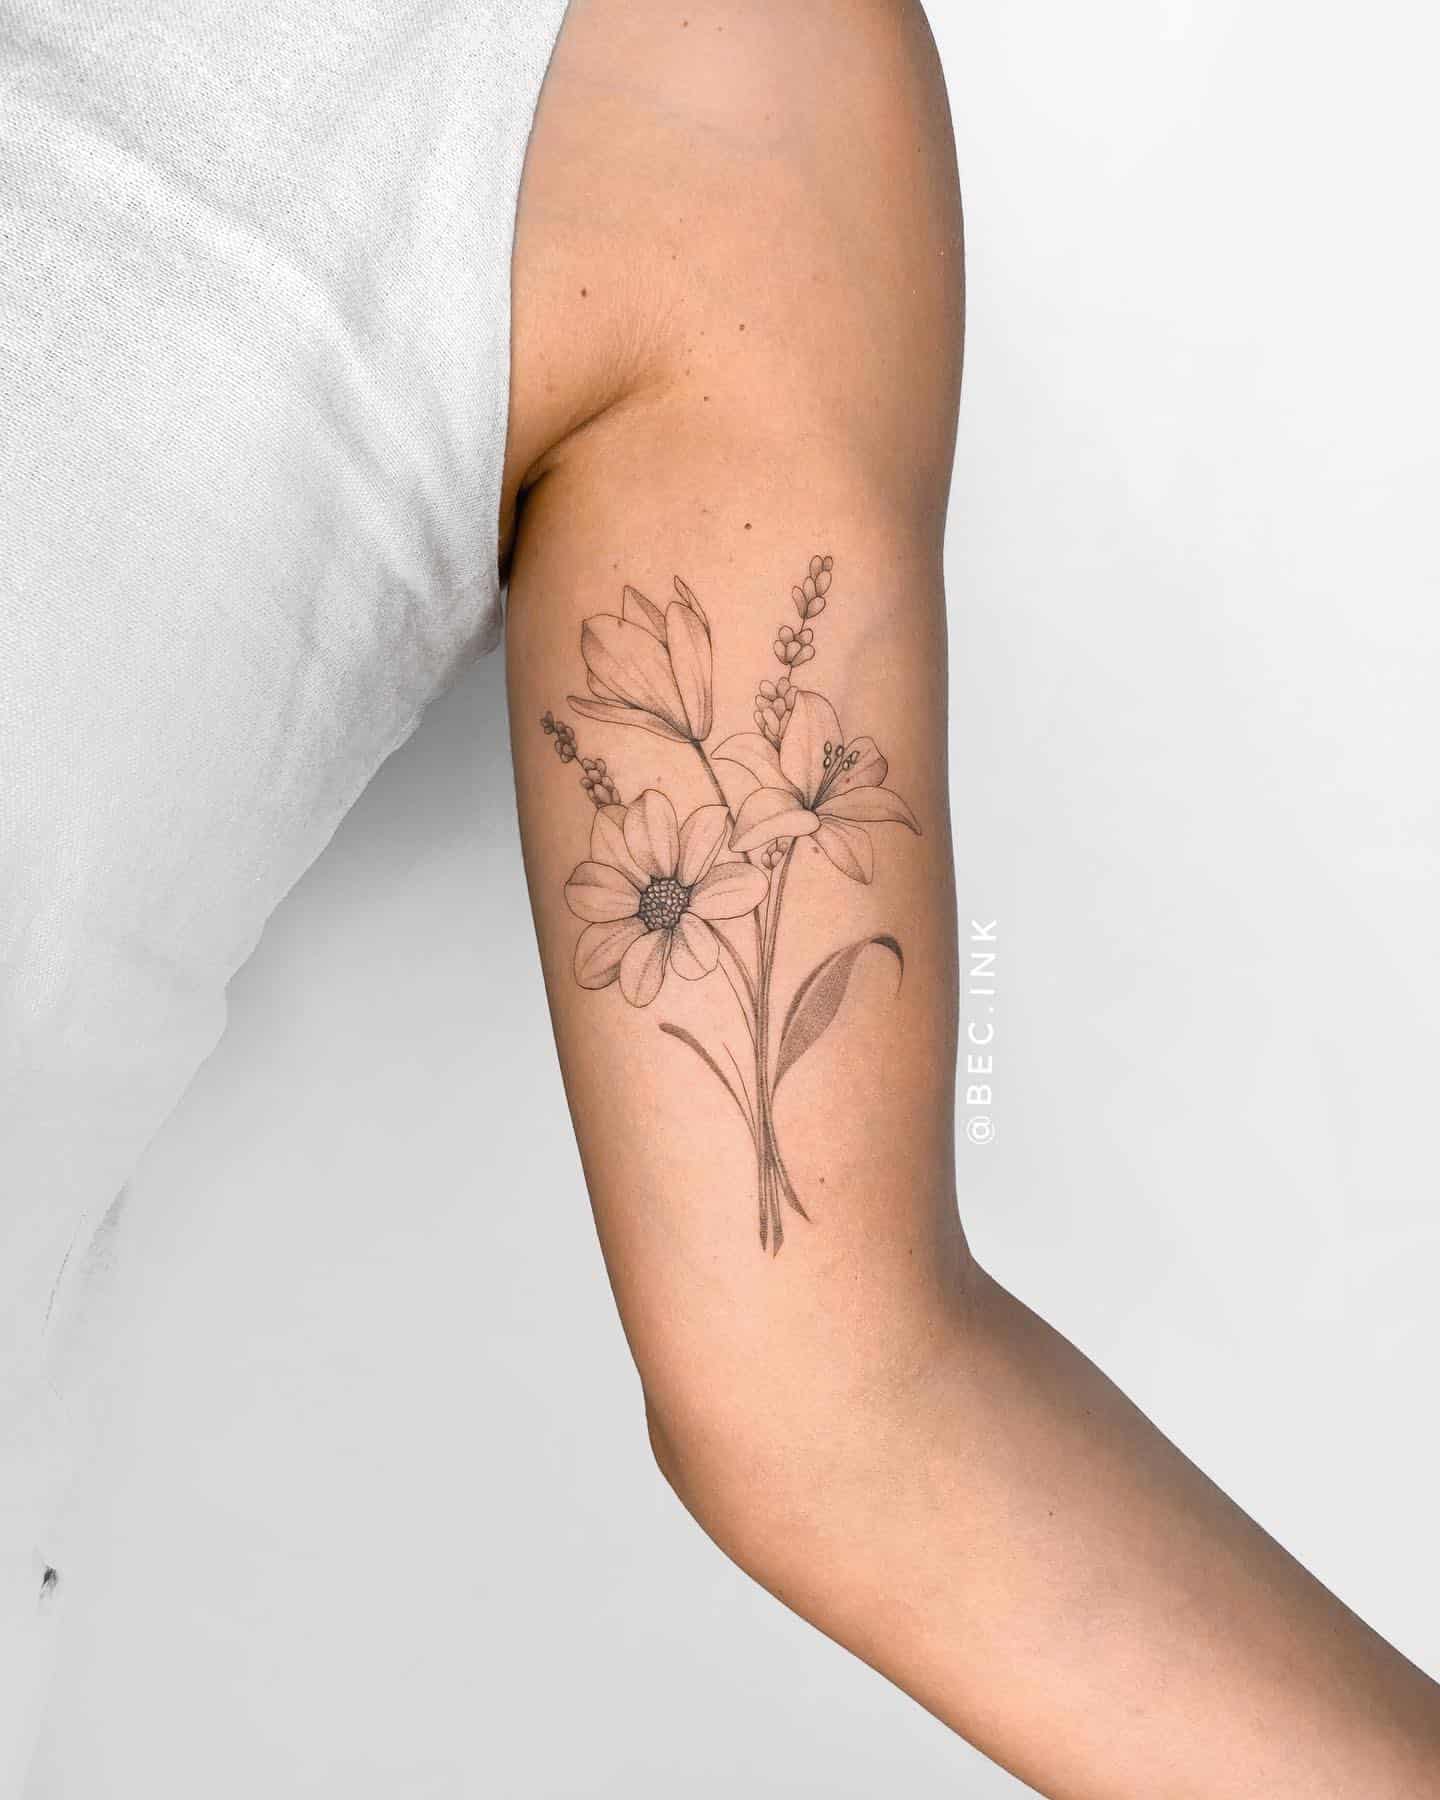 Dandelion Tattoos: Designs, Meanings, Ideas, and Photos - TatRing